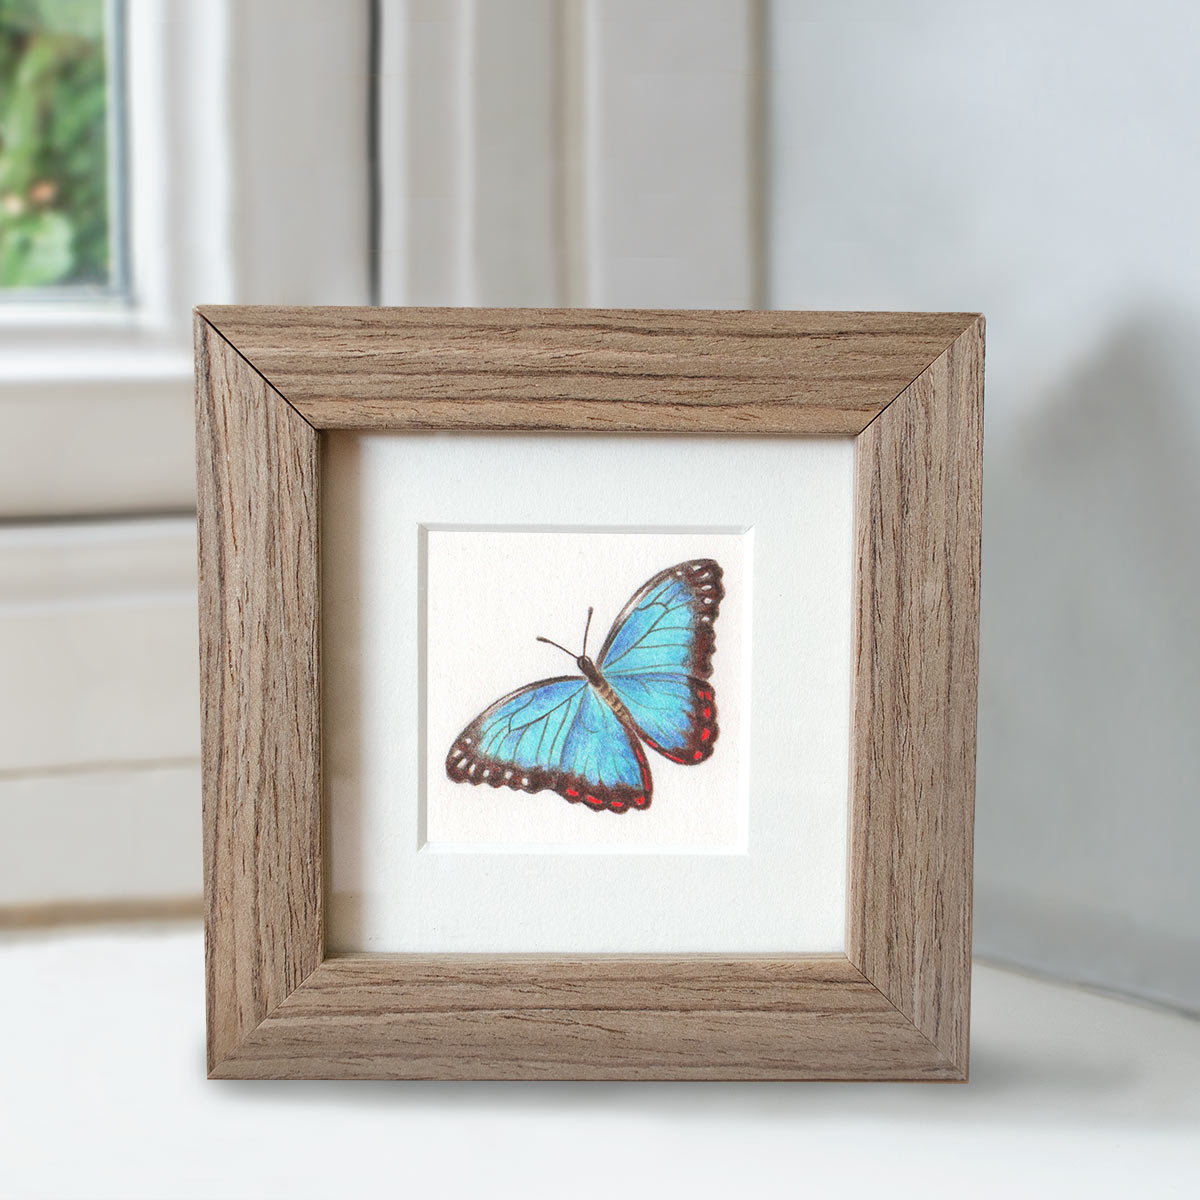 Minature collection - Common Morpho